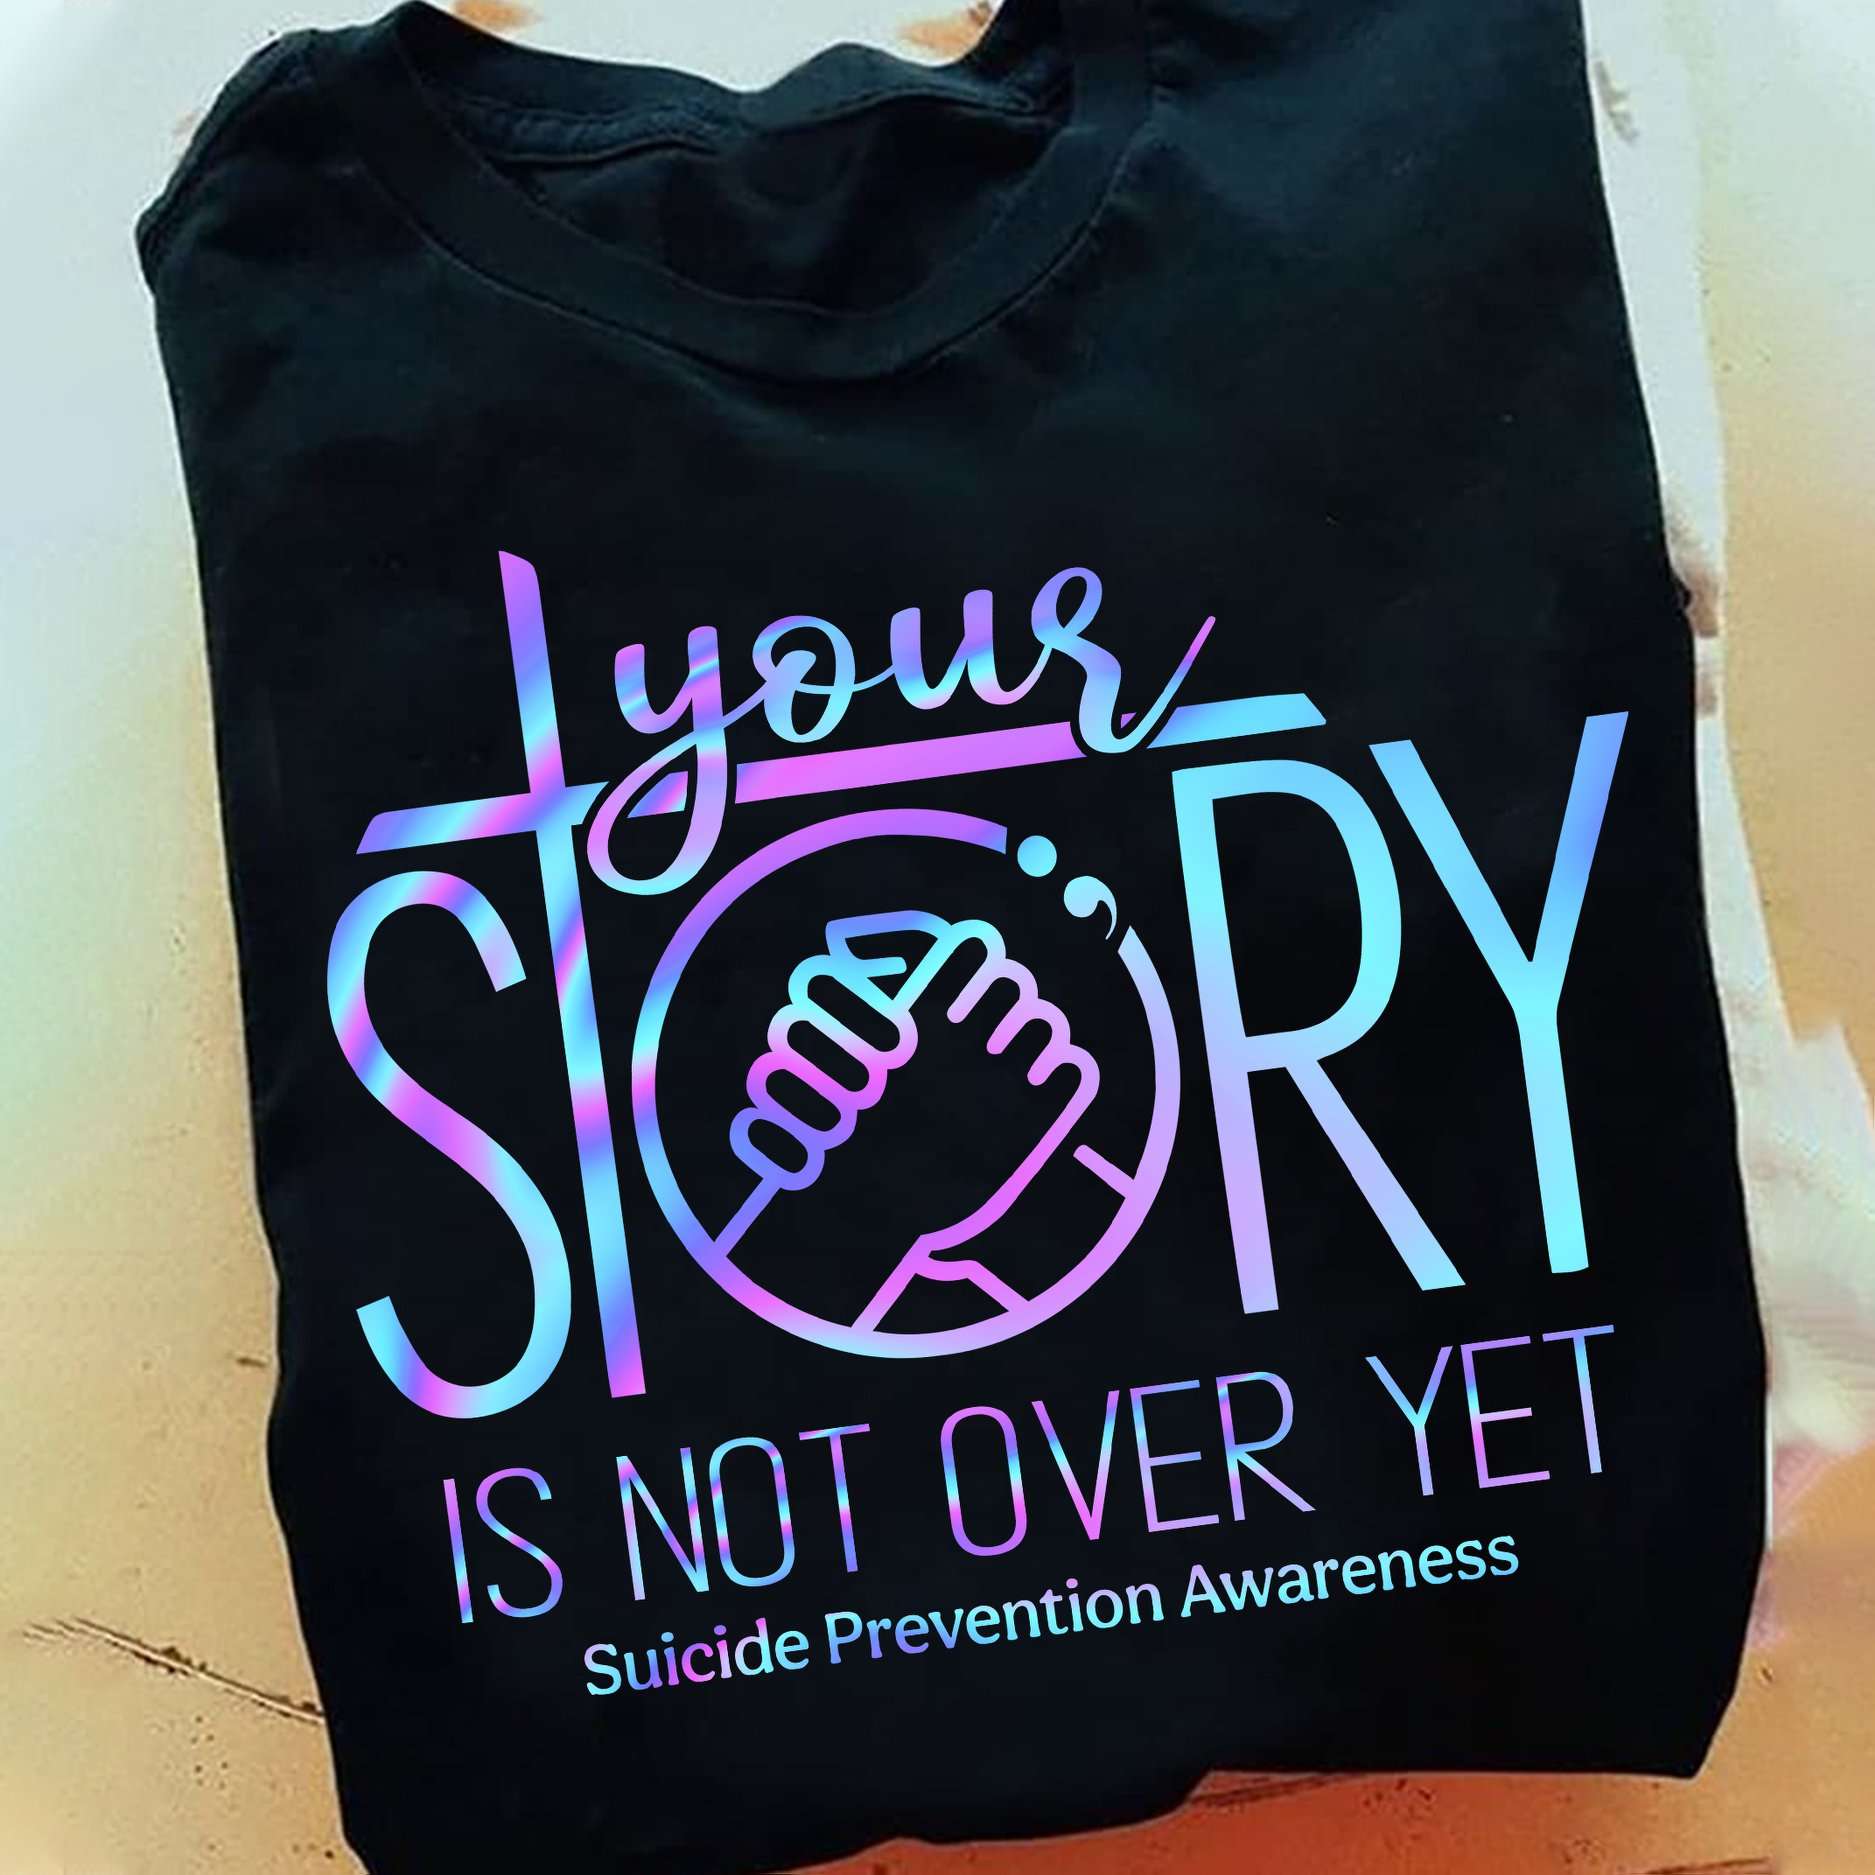 Your story is not over yet suicide prevention awareness